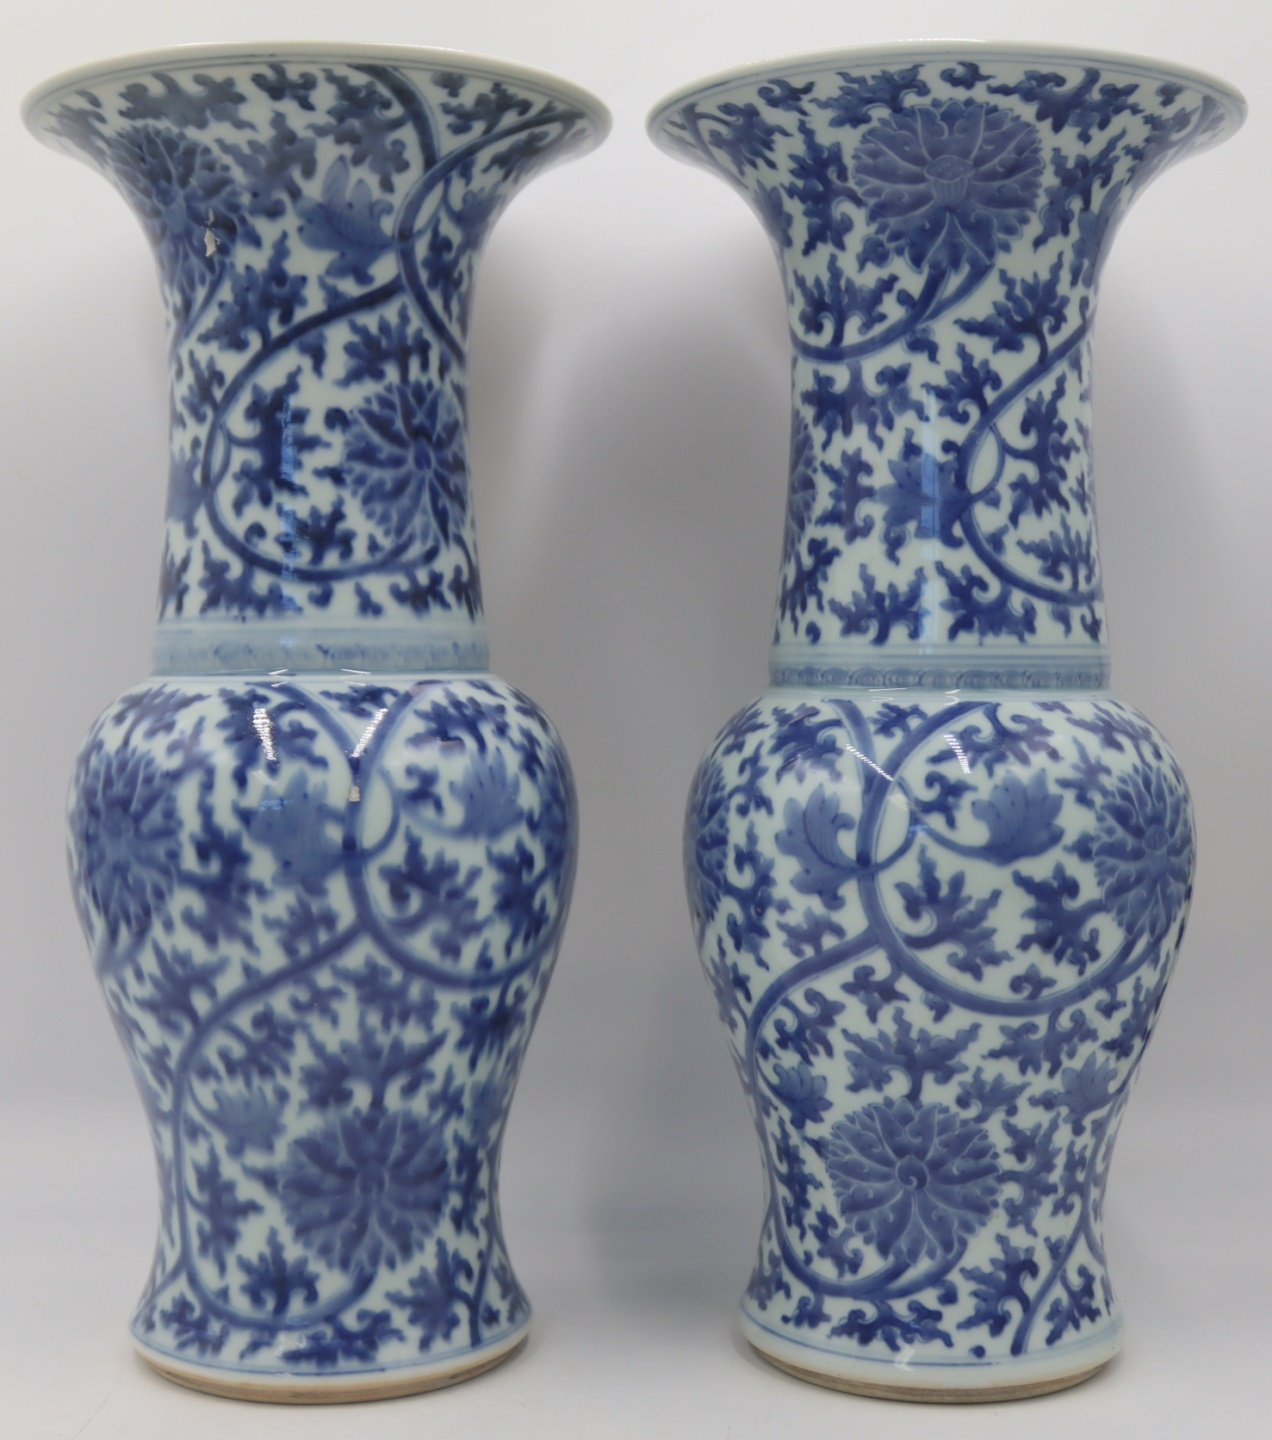 PAIR OF MID-19TH CENTURY CHINESE